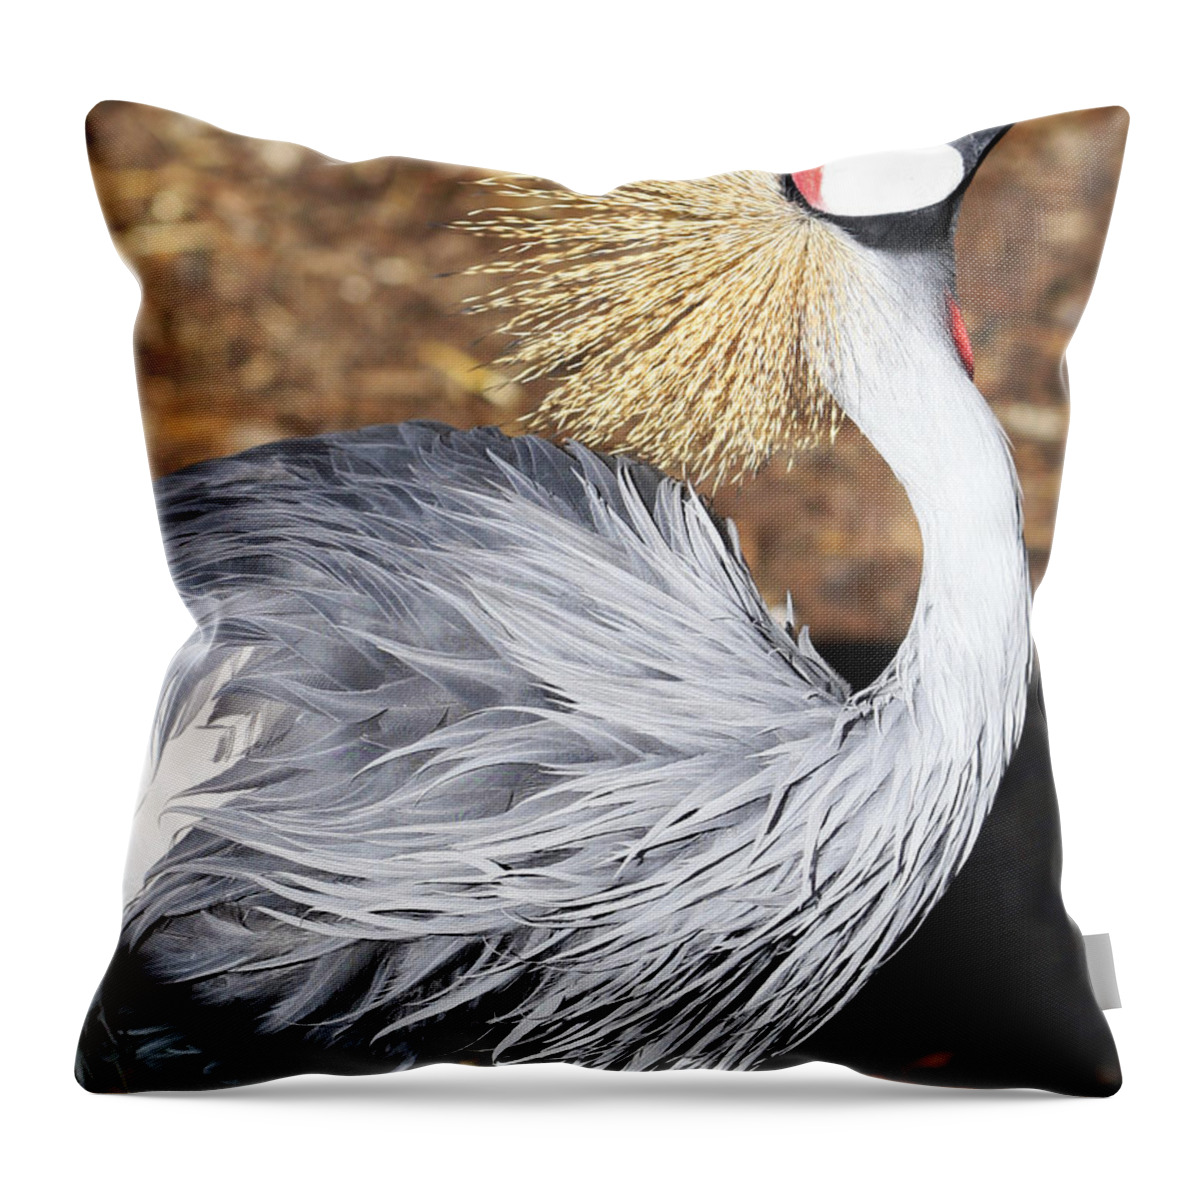 Bird Throw Pillow featuring the photograph Fancy Feathers by Marilyn Hunt